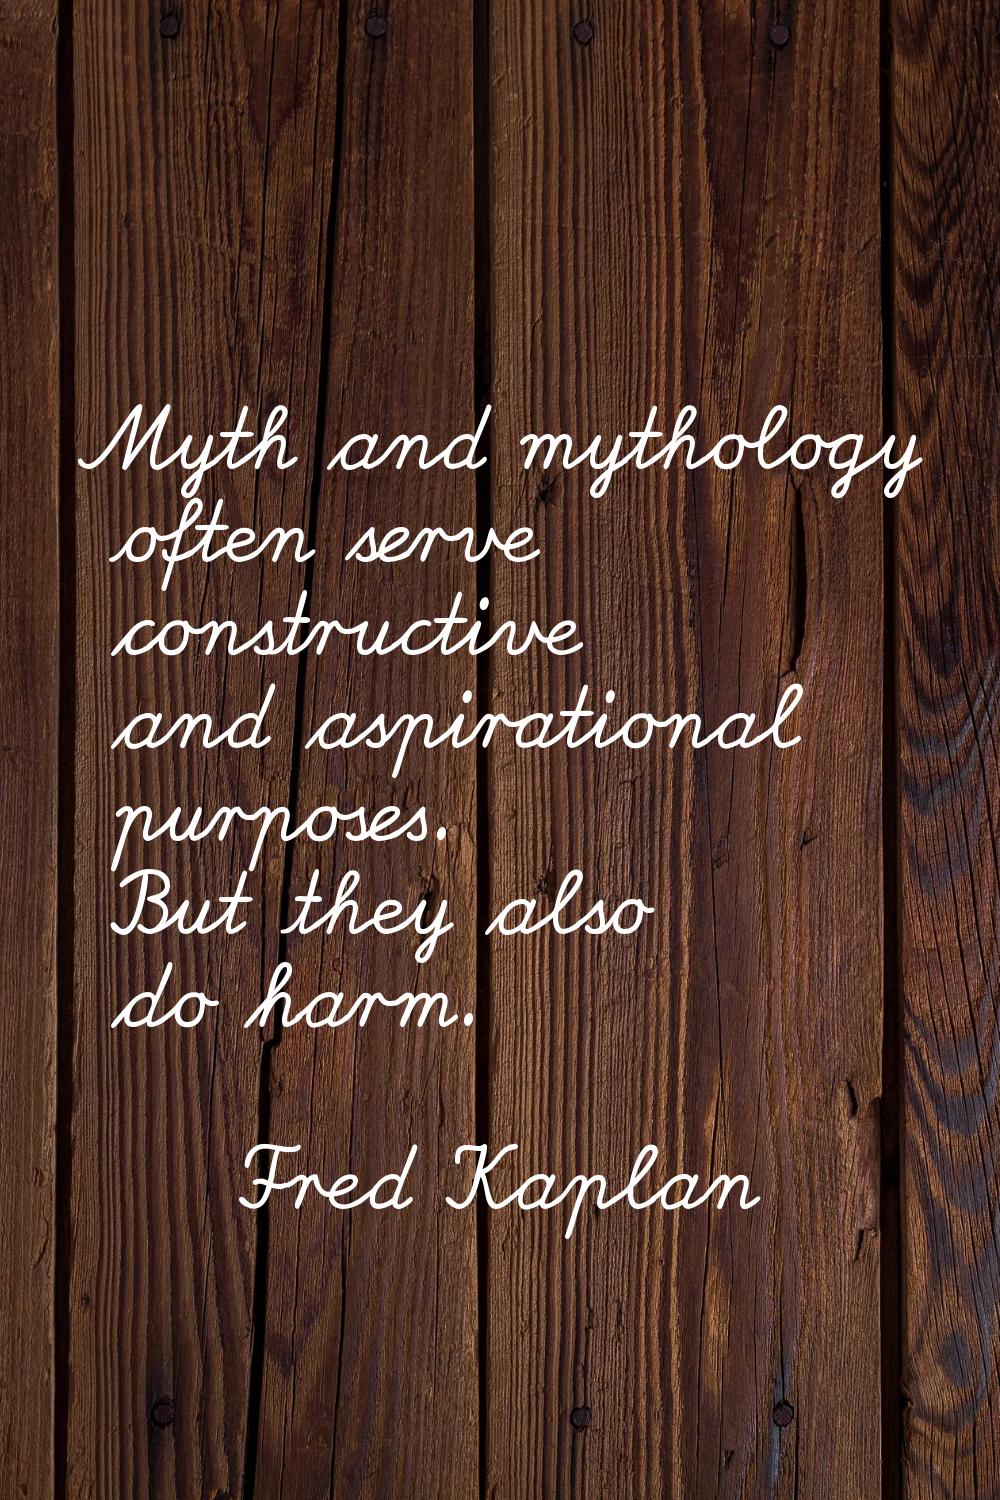 Myth and mythology often serve constructive and aspirational purposes. But they also do harm.